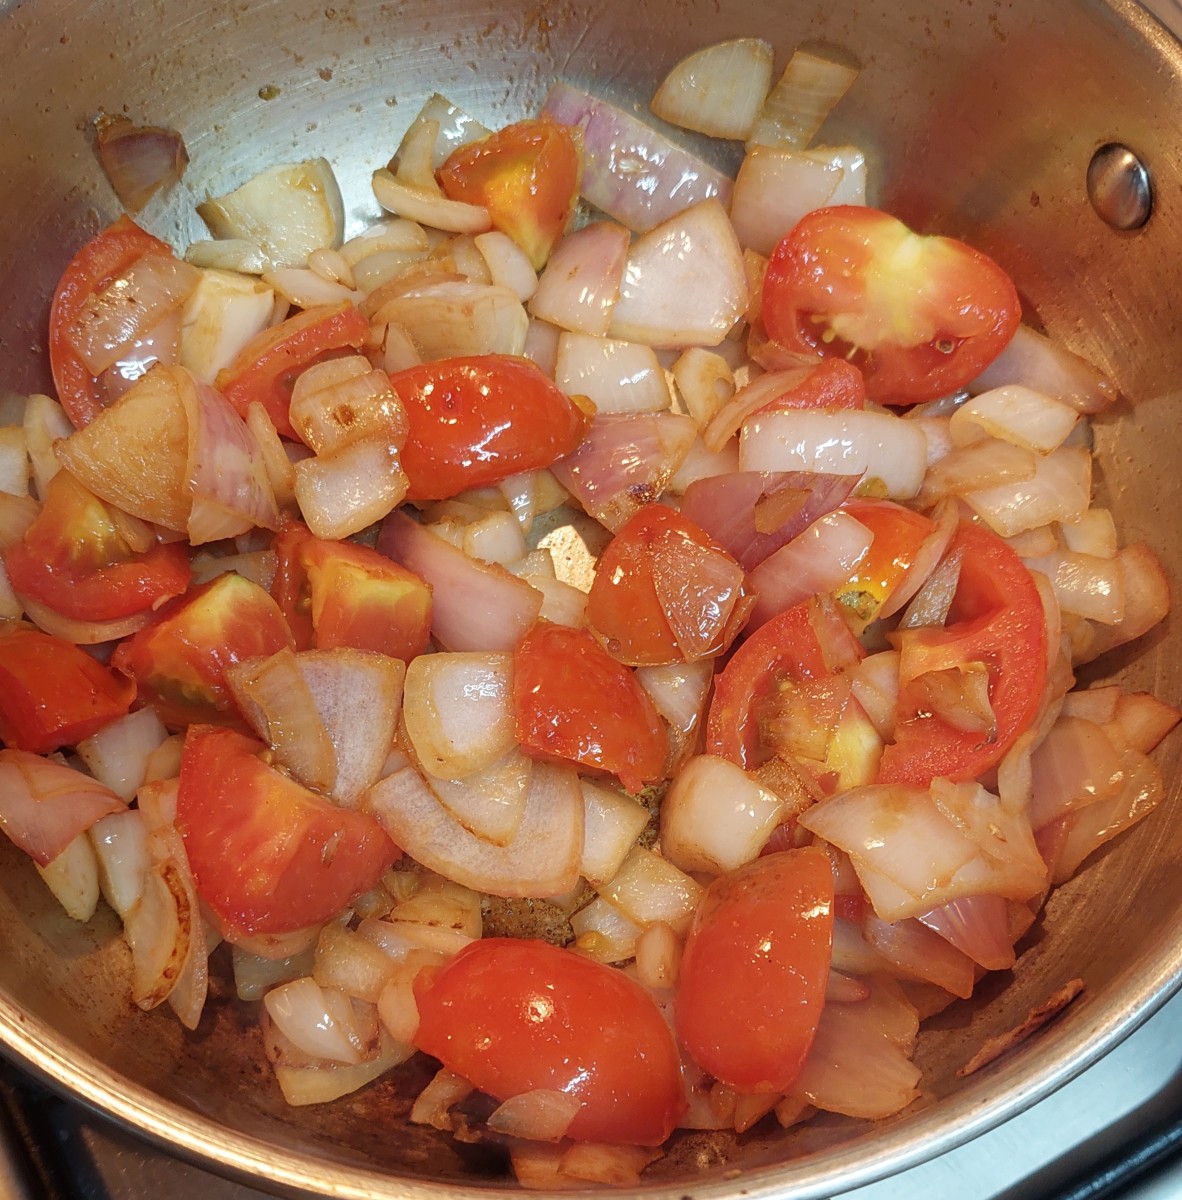 Add roughly chopped tomatoes and fry for a minute.